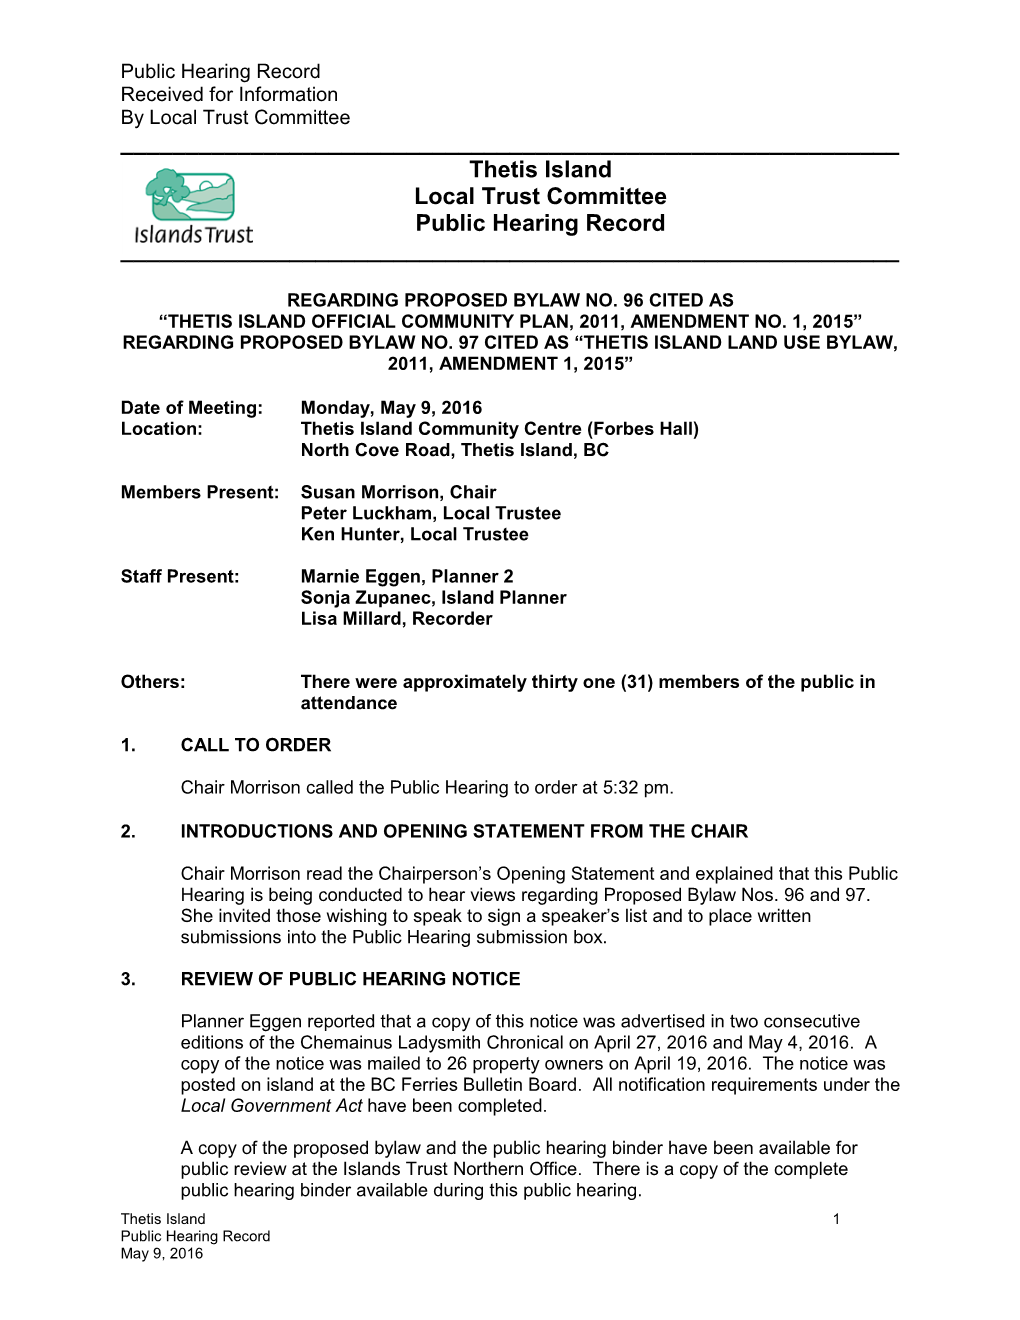 Thetis Island Local Trust Committee Public Hearing Record ______